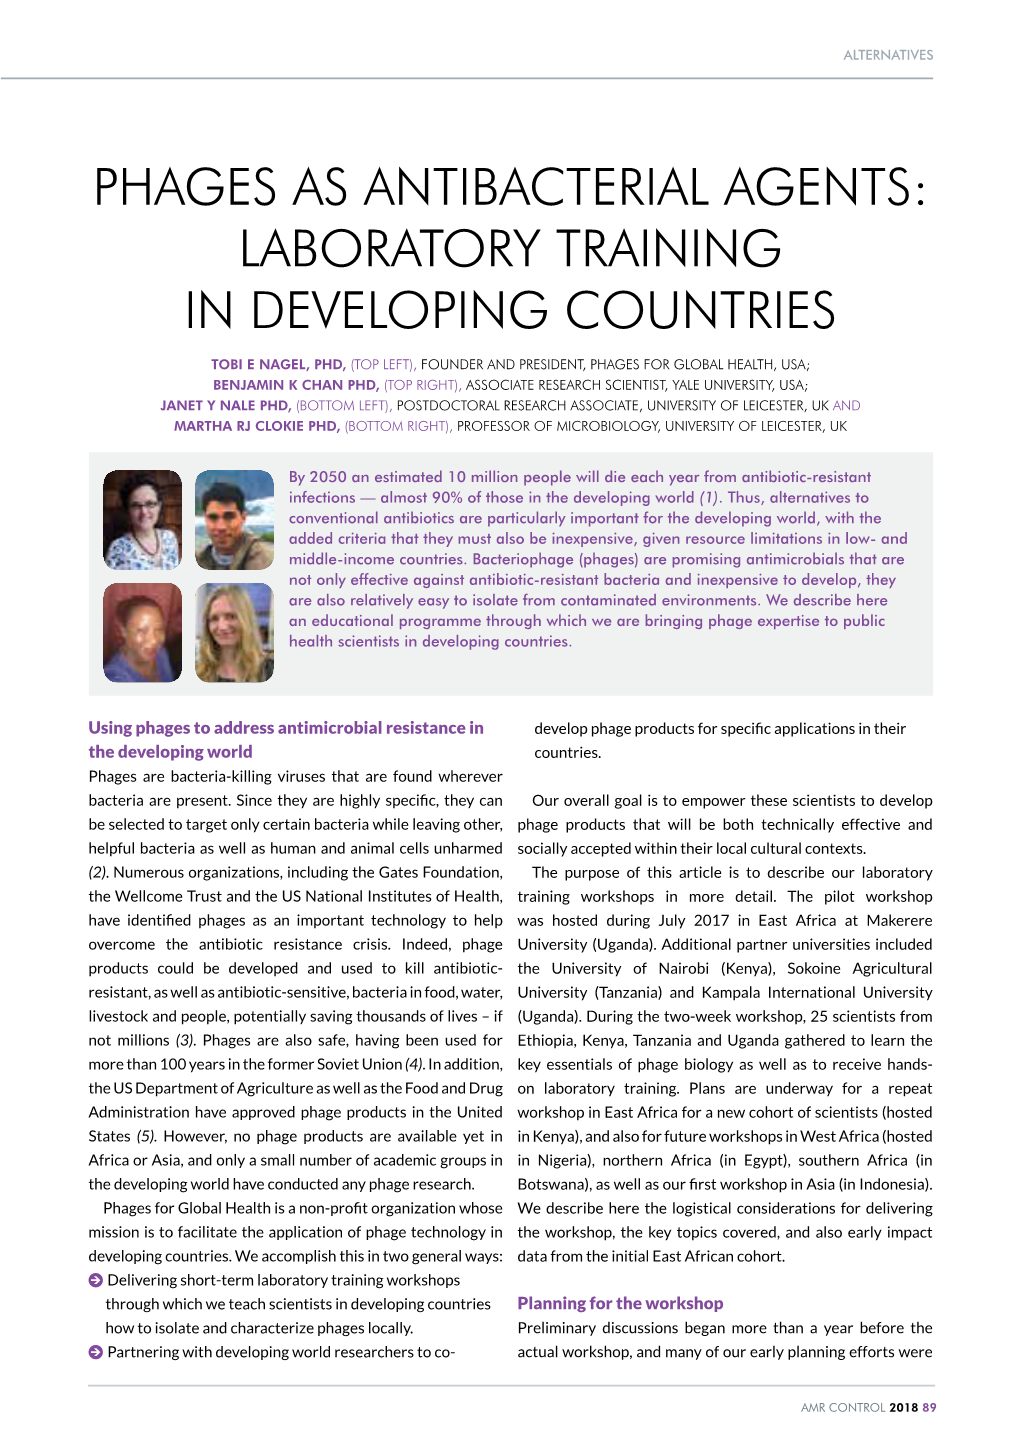 Phages As Antibacterial Agents: Laboratory Training in Developing Countries